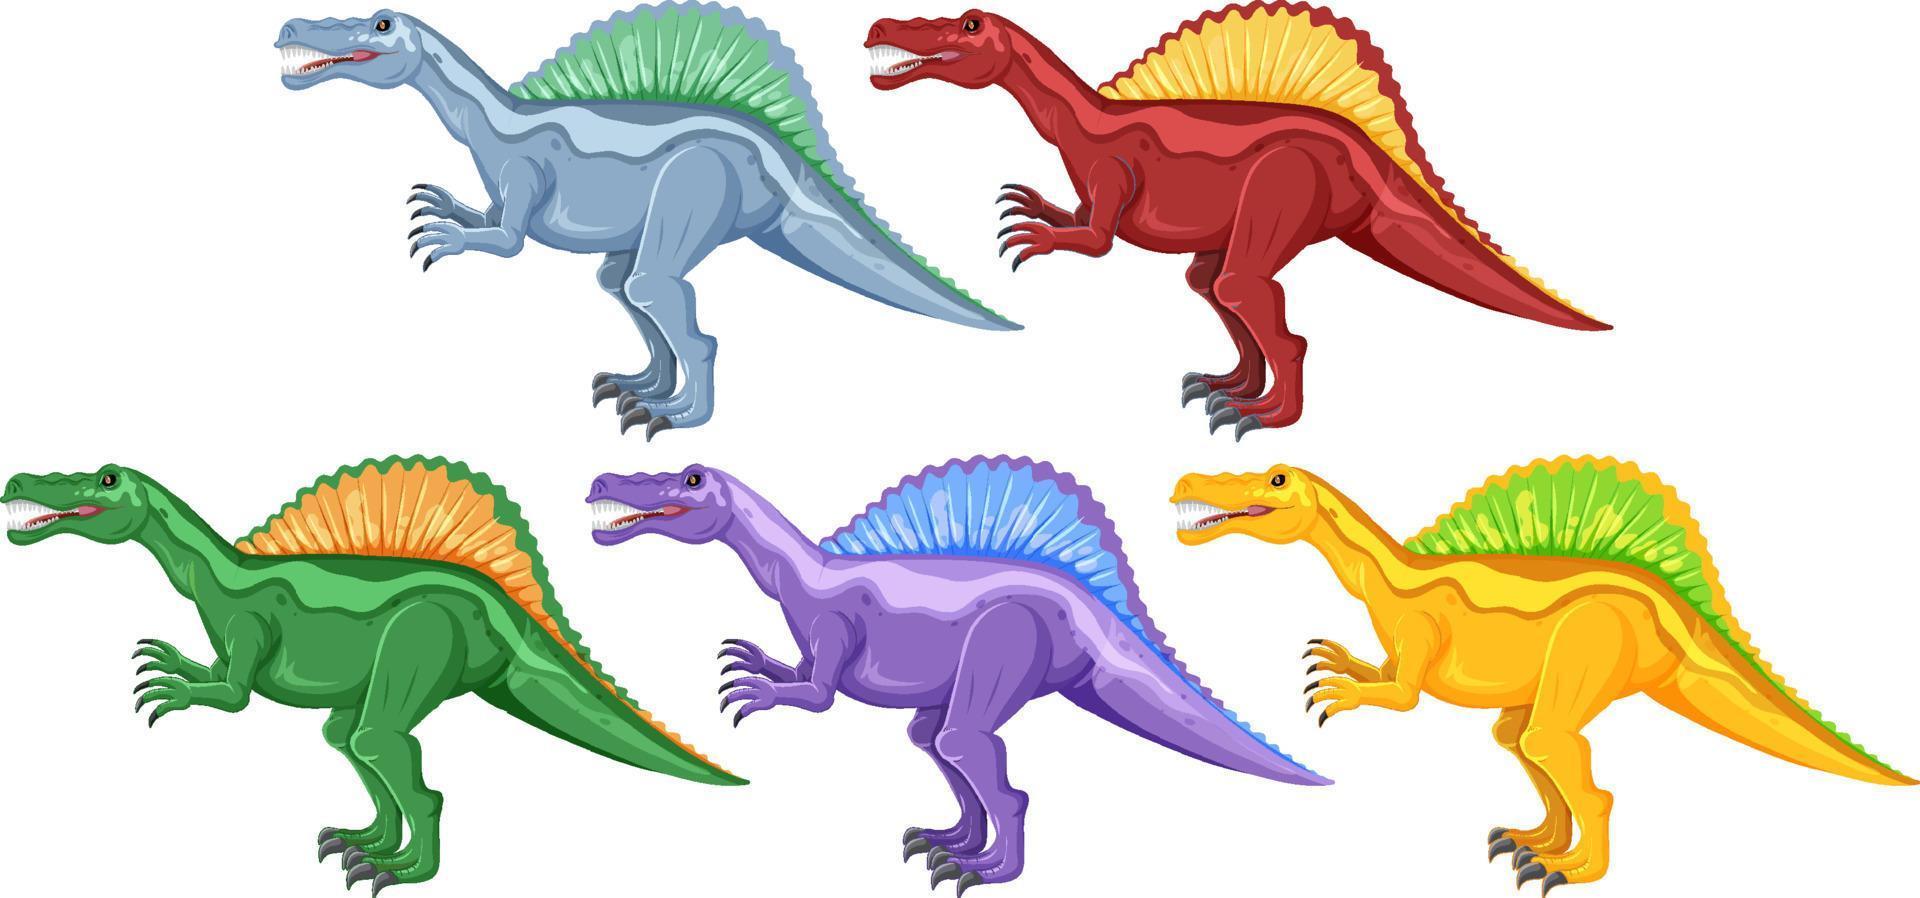 A set of spinosaurus dinosaurs on white background vector